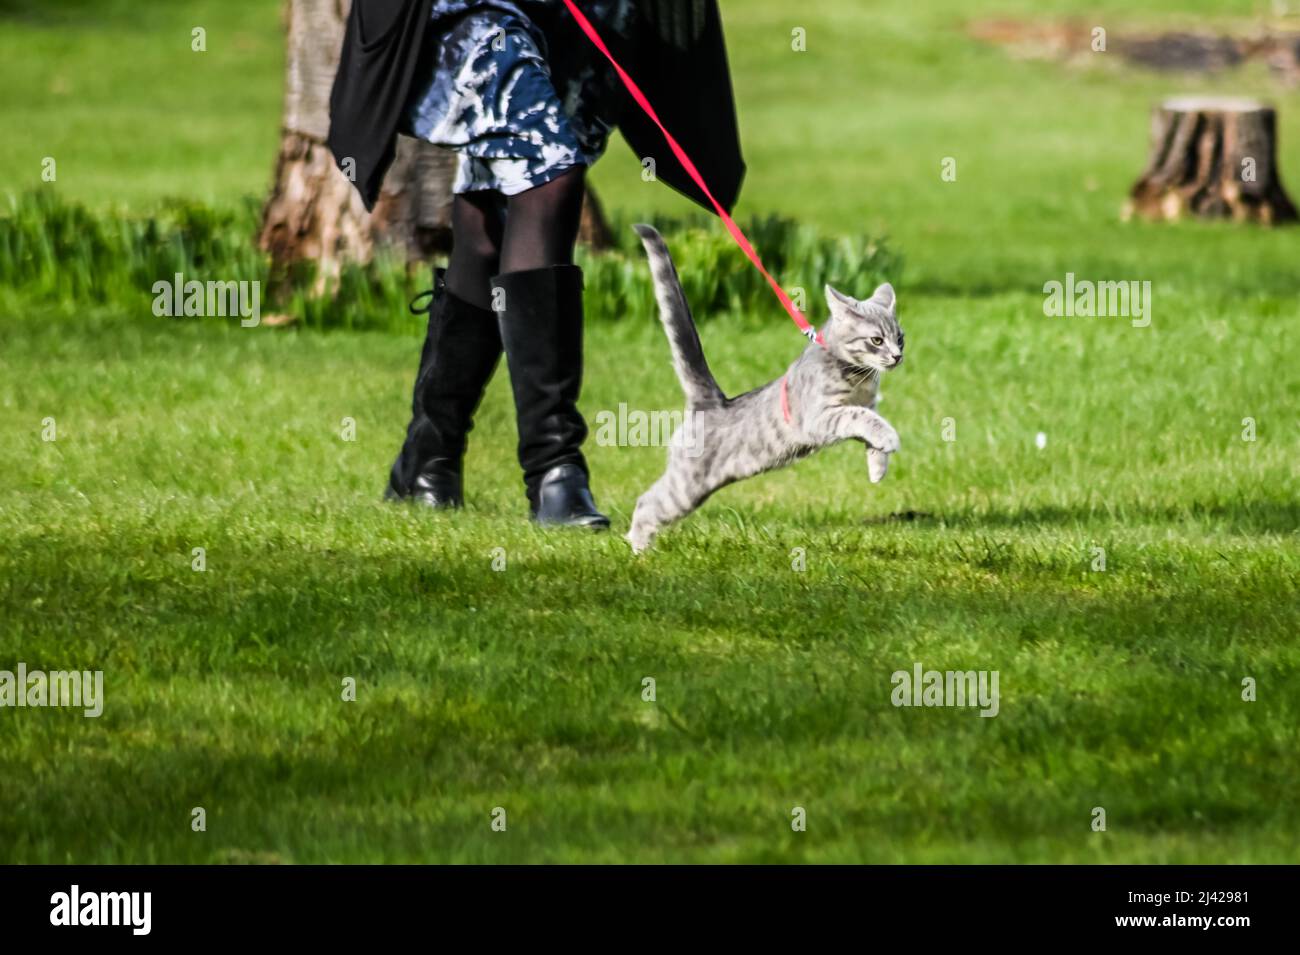 A grey adolescent tabby cat being taken on a walk in their red harness, lead on a sunny spring afternoon, felis catus a domestic cat Stock Photo